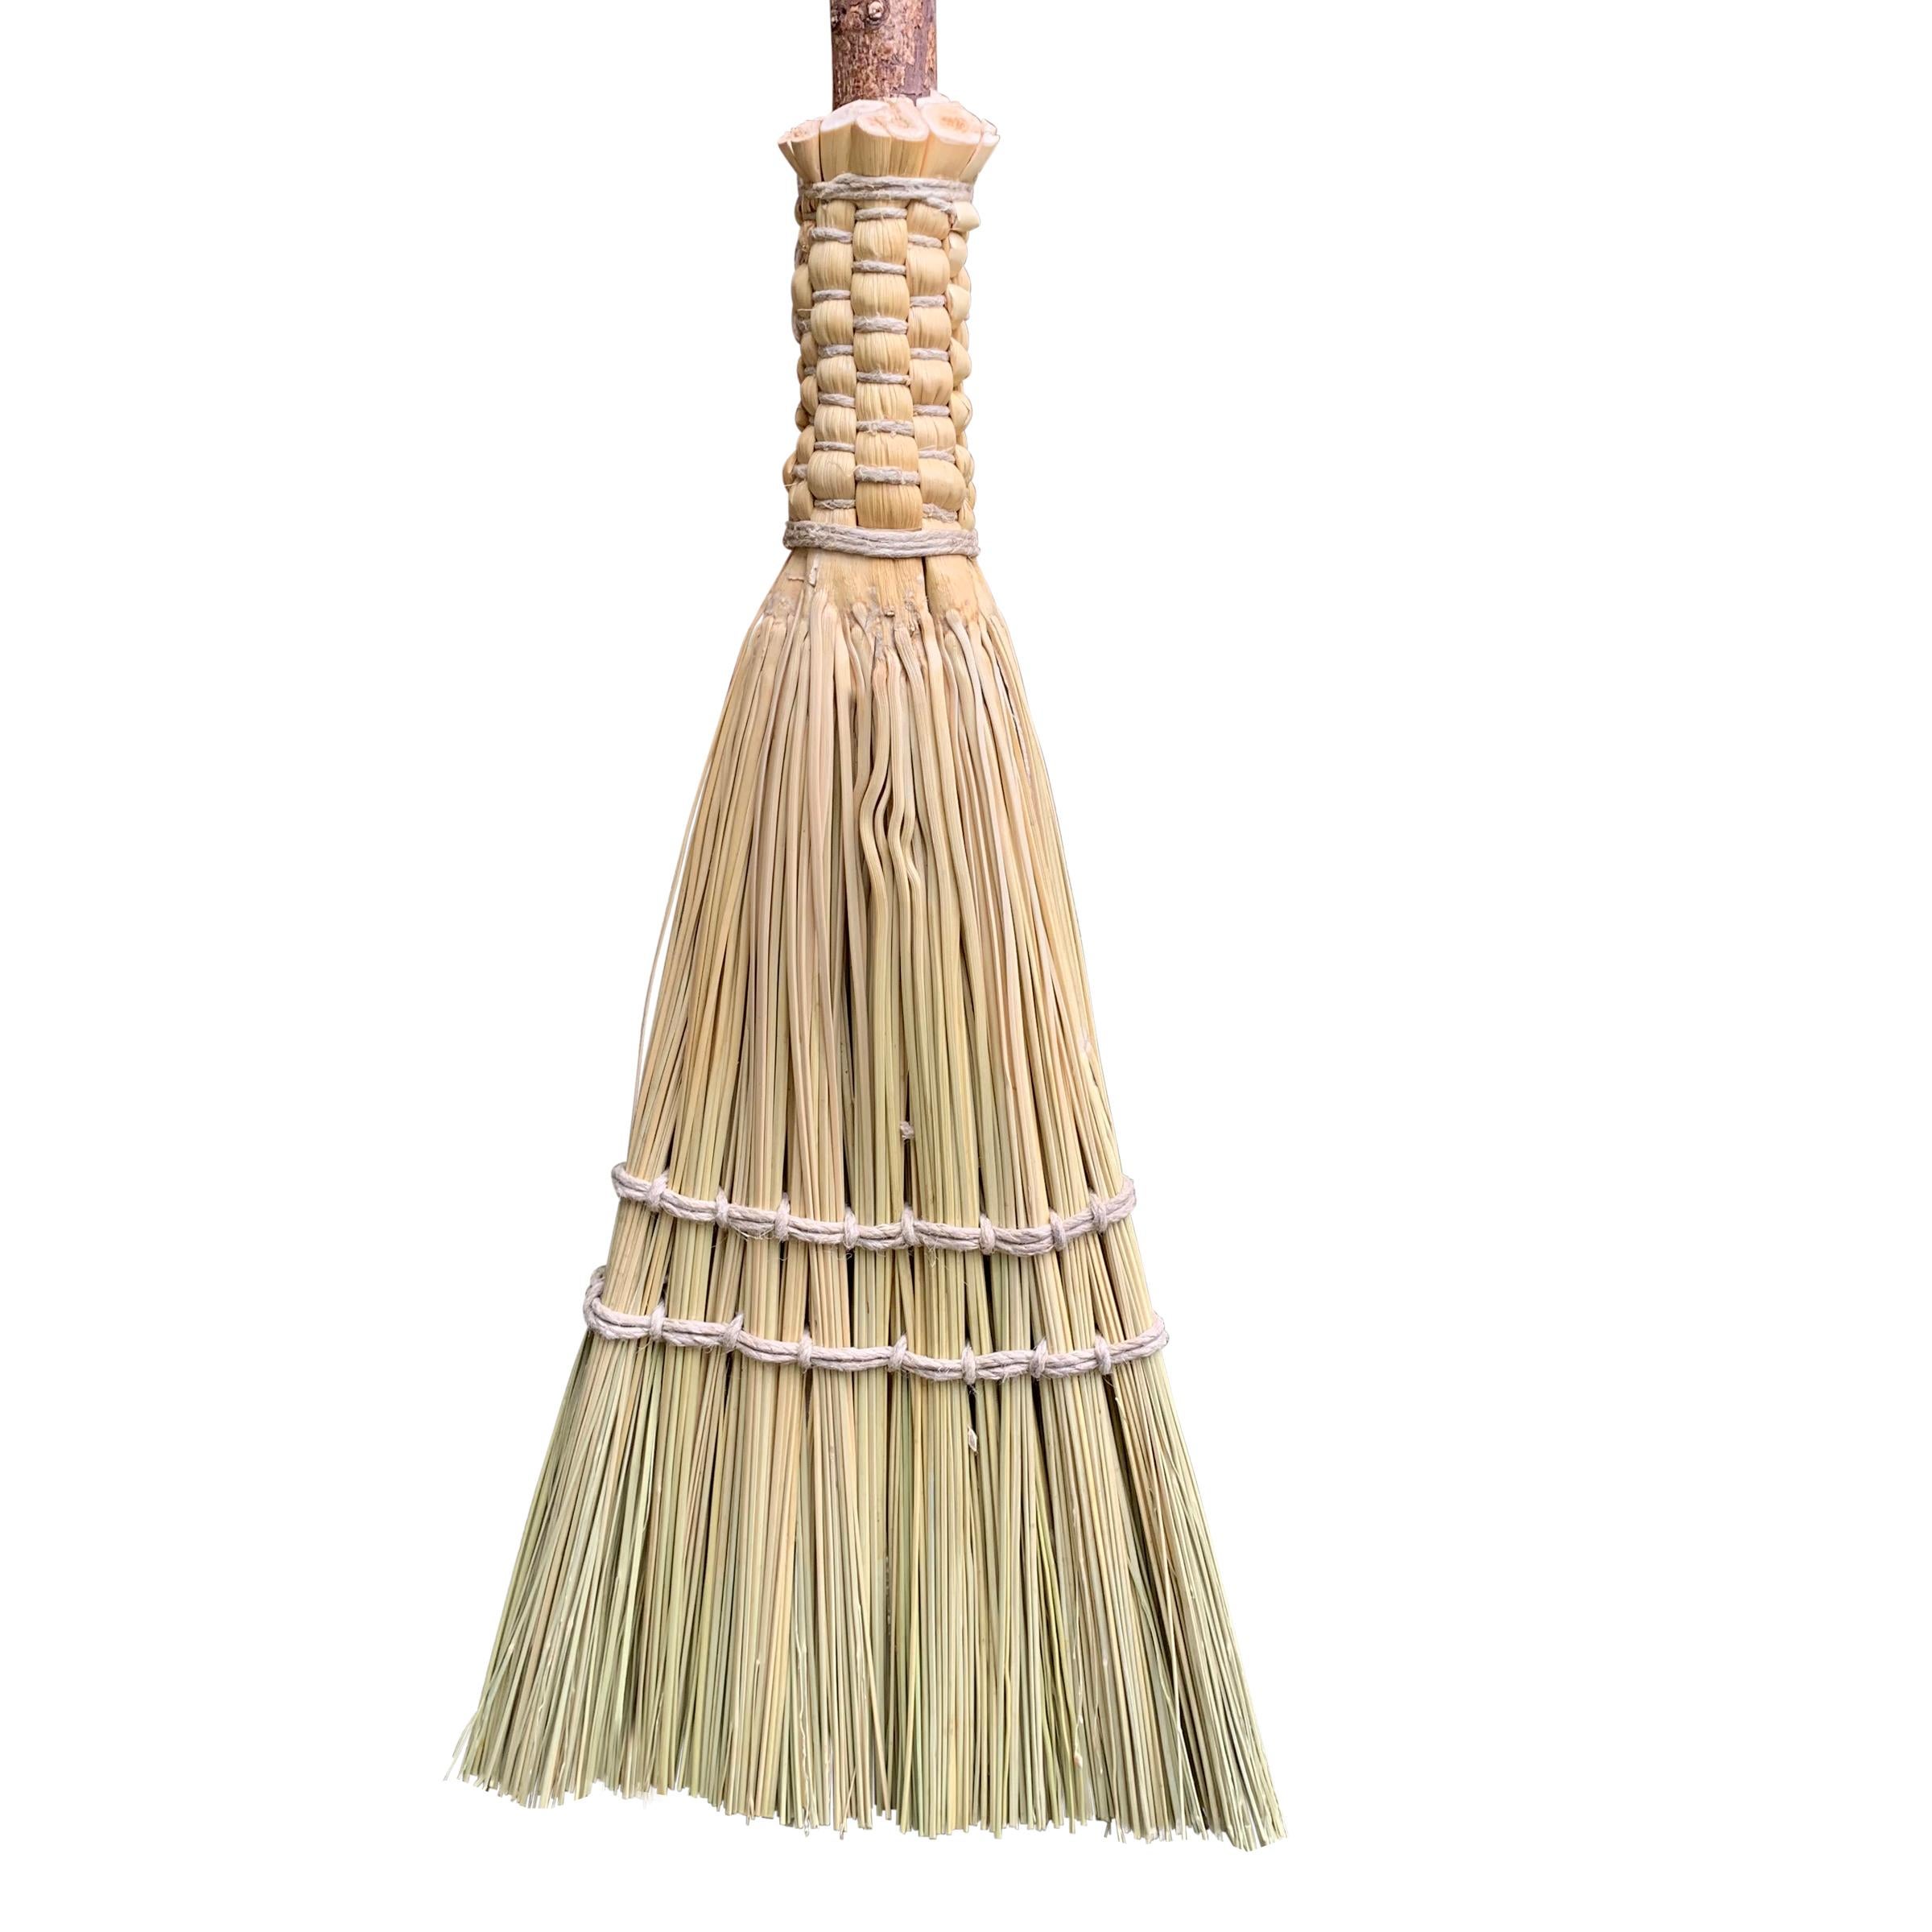 Handmade by artisans in rural Kentucky, our Right Proper Hearth Broom, perfect for sweeping tight places like stairs and corners, was crafted with Shaker design principles in mind: “Don't make something unless it is both necessary and useful; and if